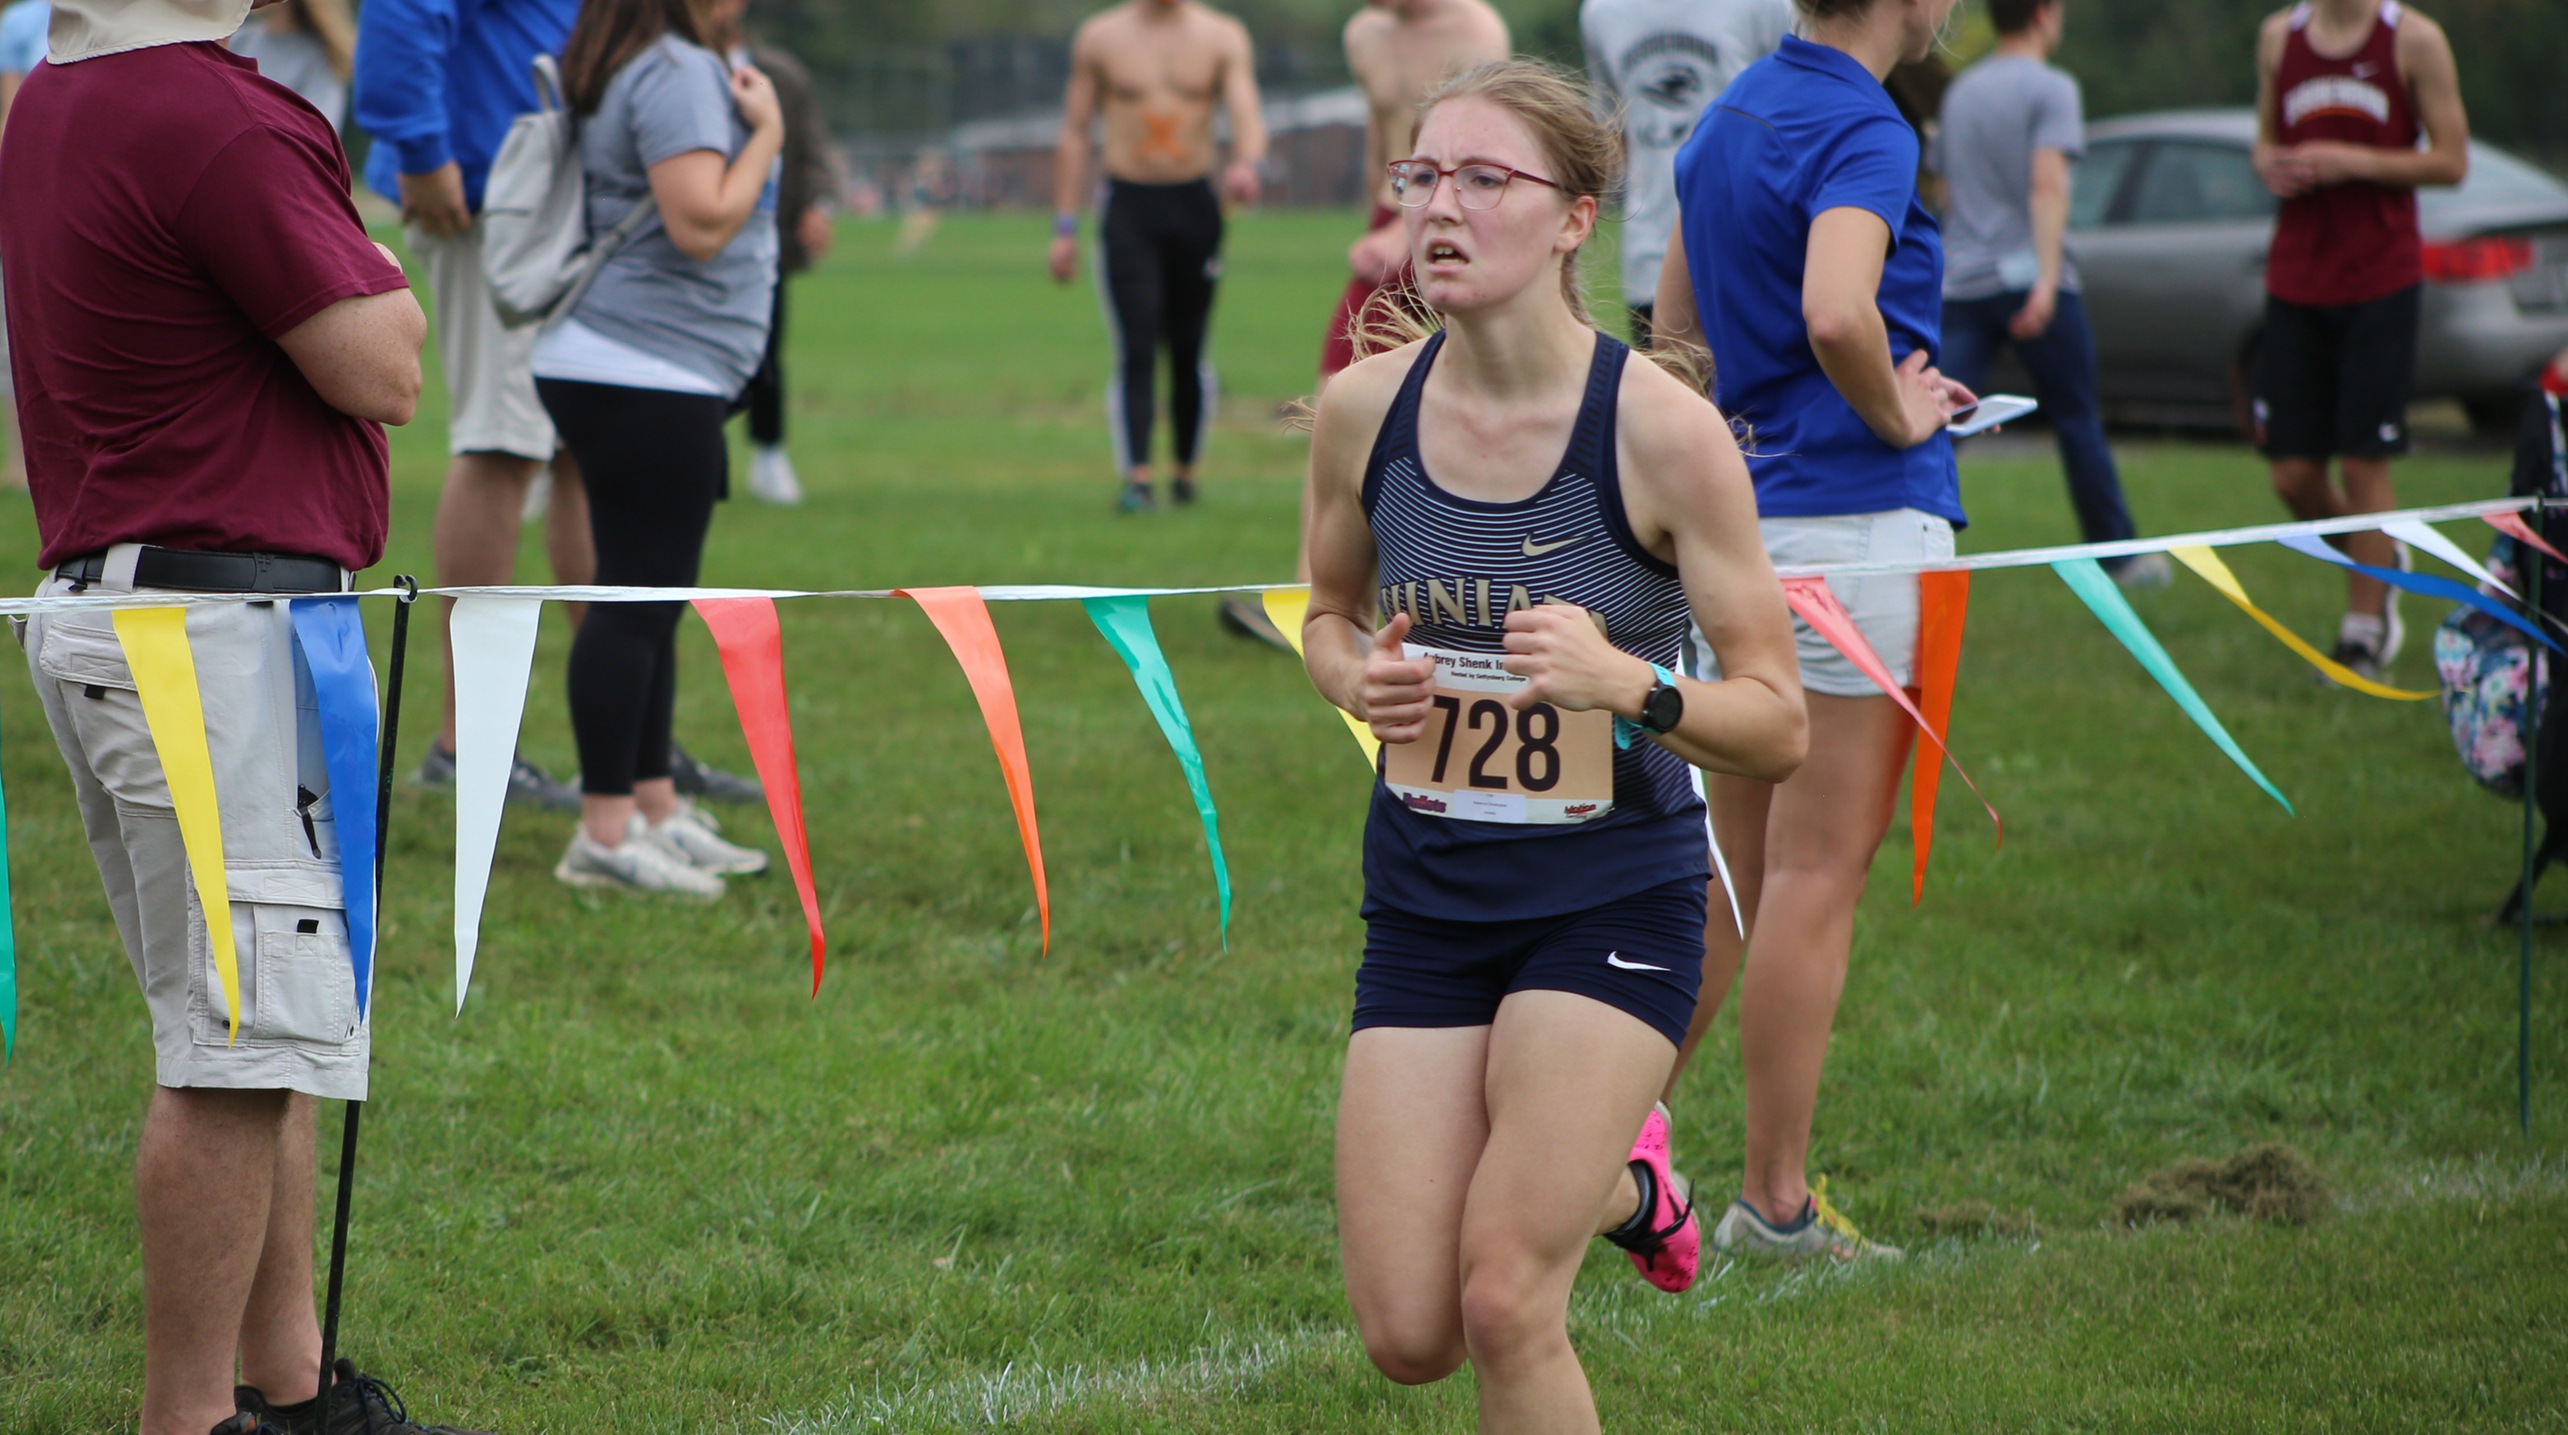 Eagles Place 11th at Aubrey Shenk Invitational